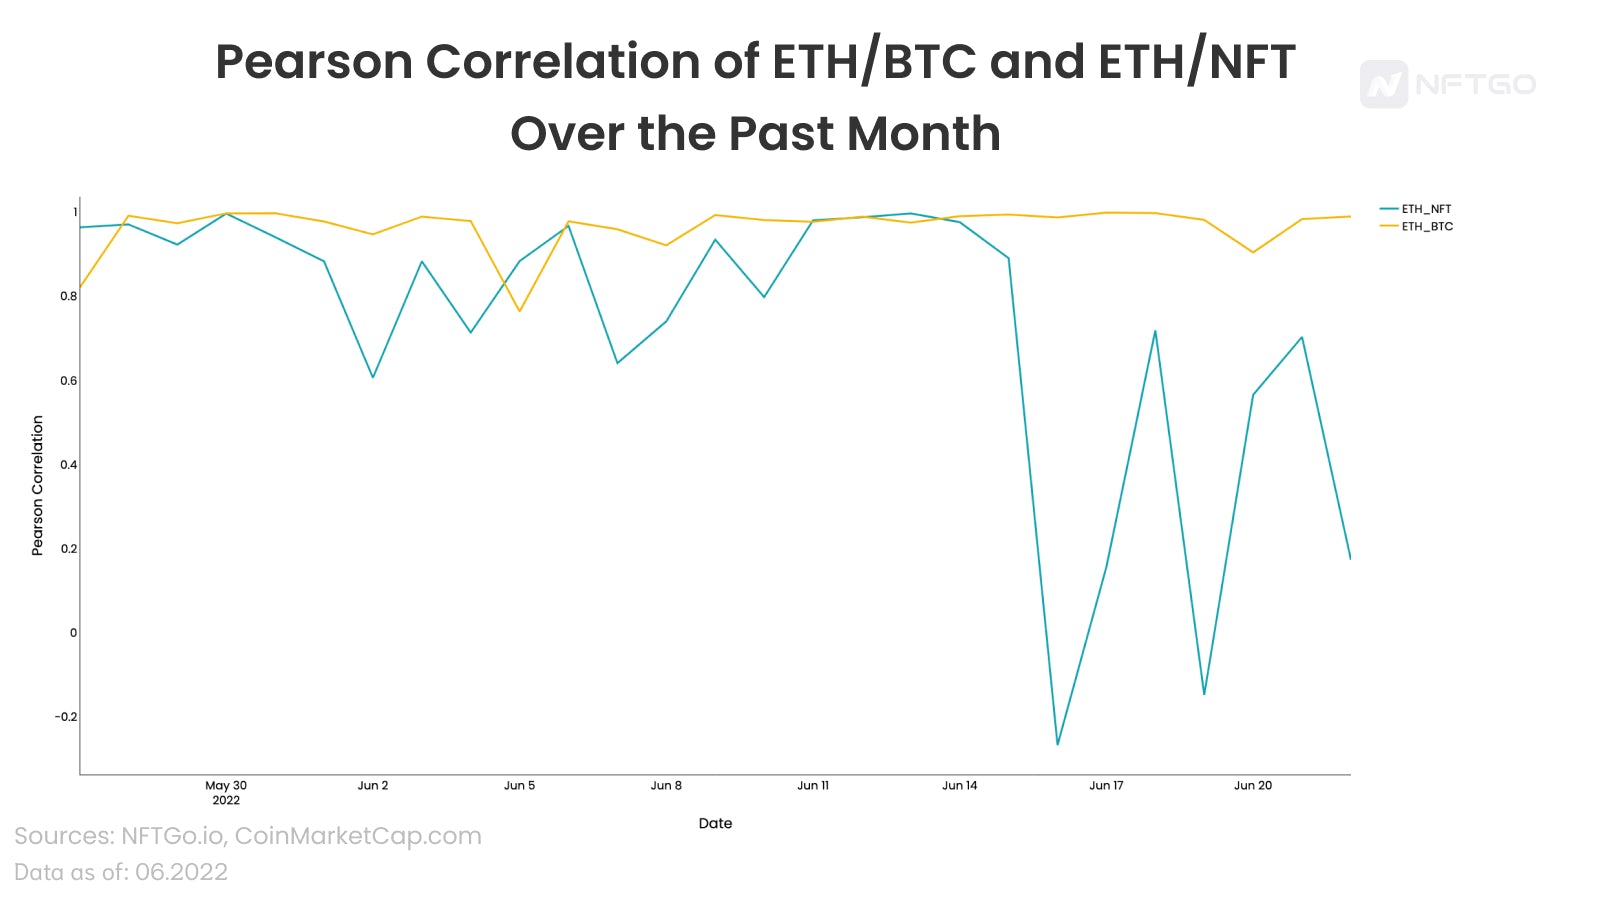 Pearson Correlation of ETH/BTC and ETH/NFT Over the Past Month 